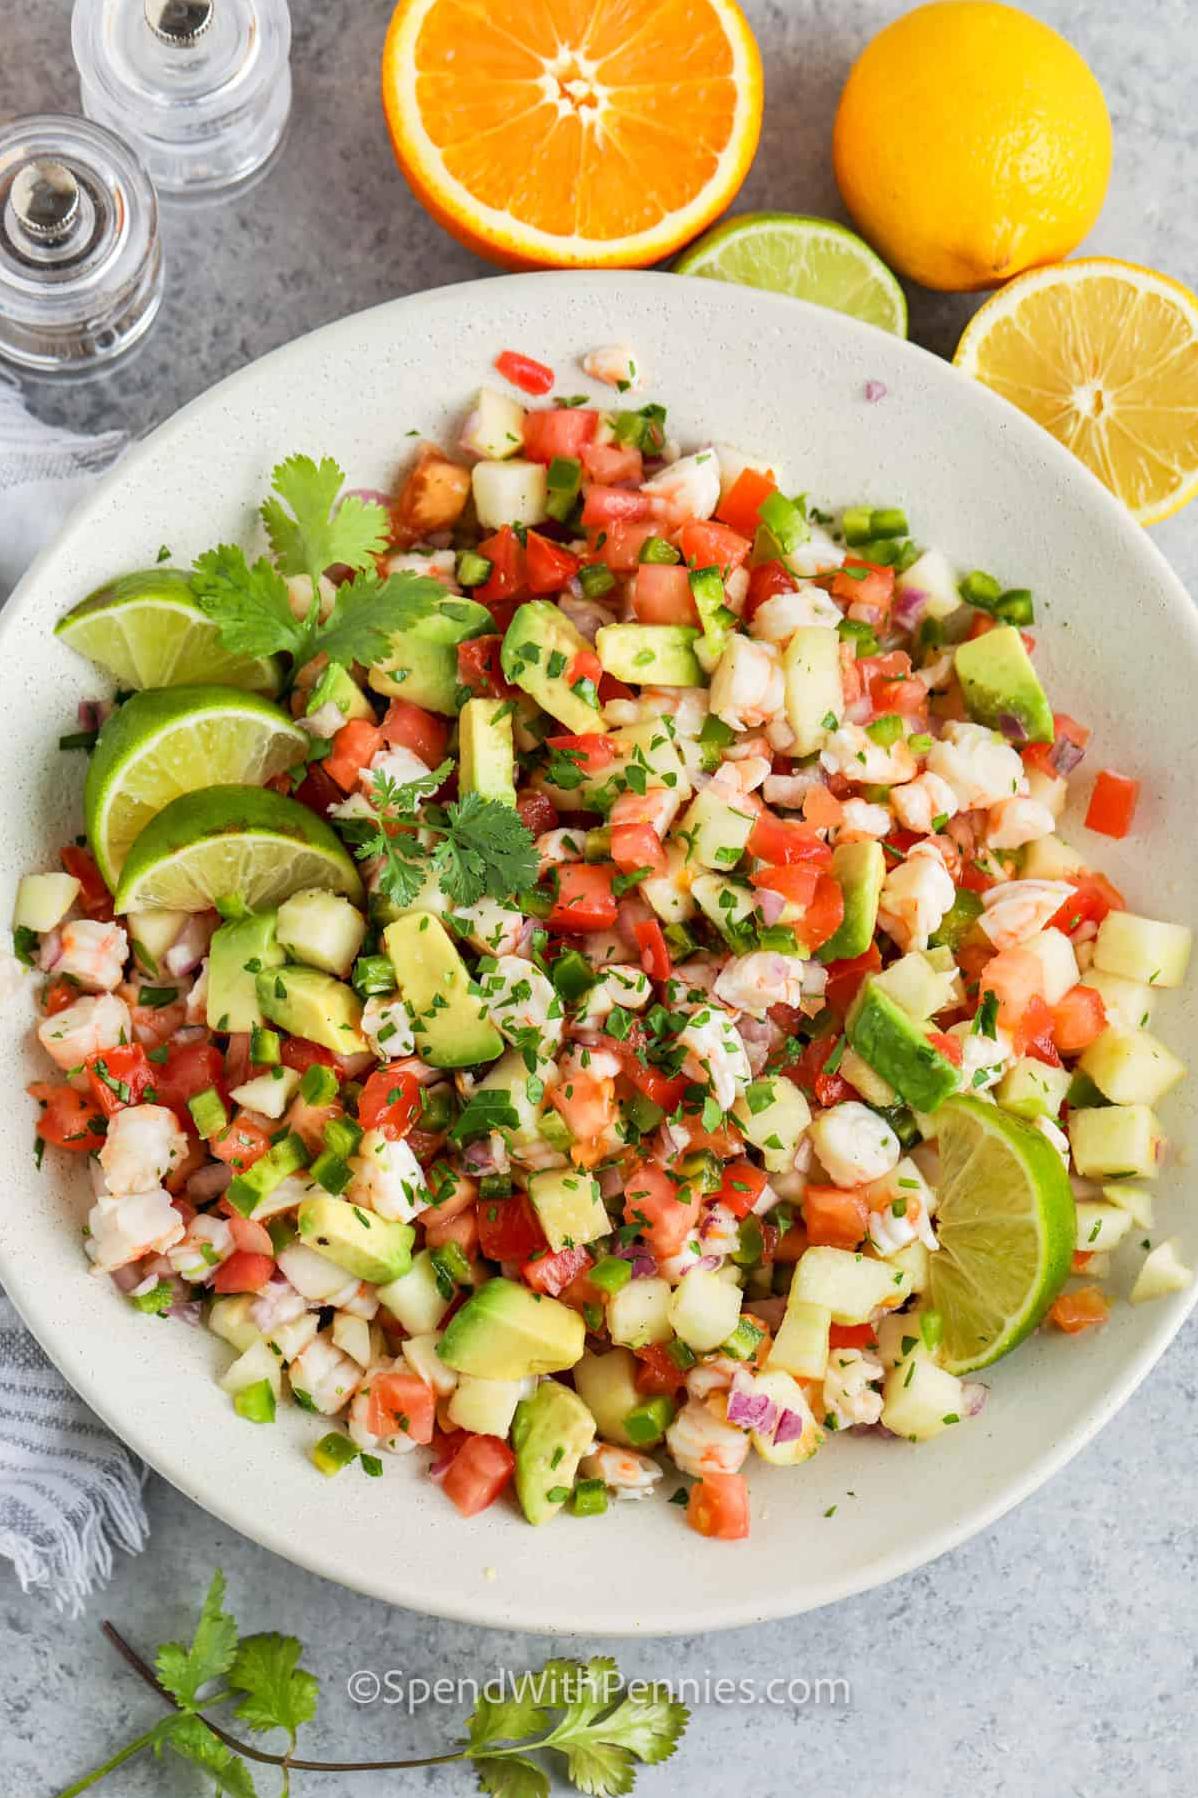  This is no ordinary salad - it's a citrusy, spicy, seafood delight.